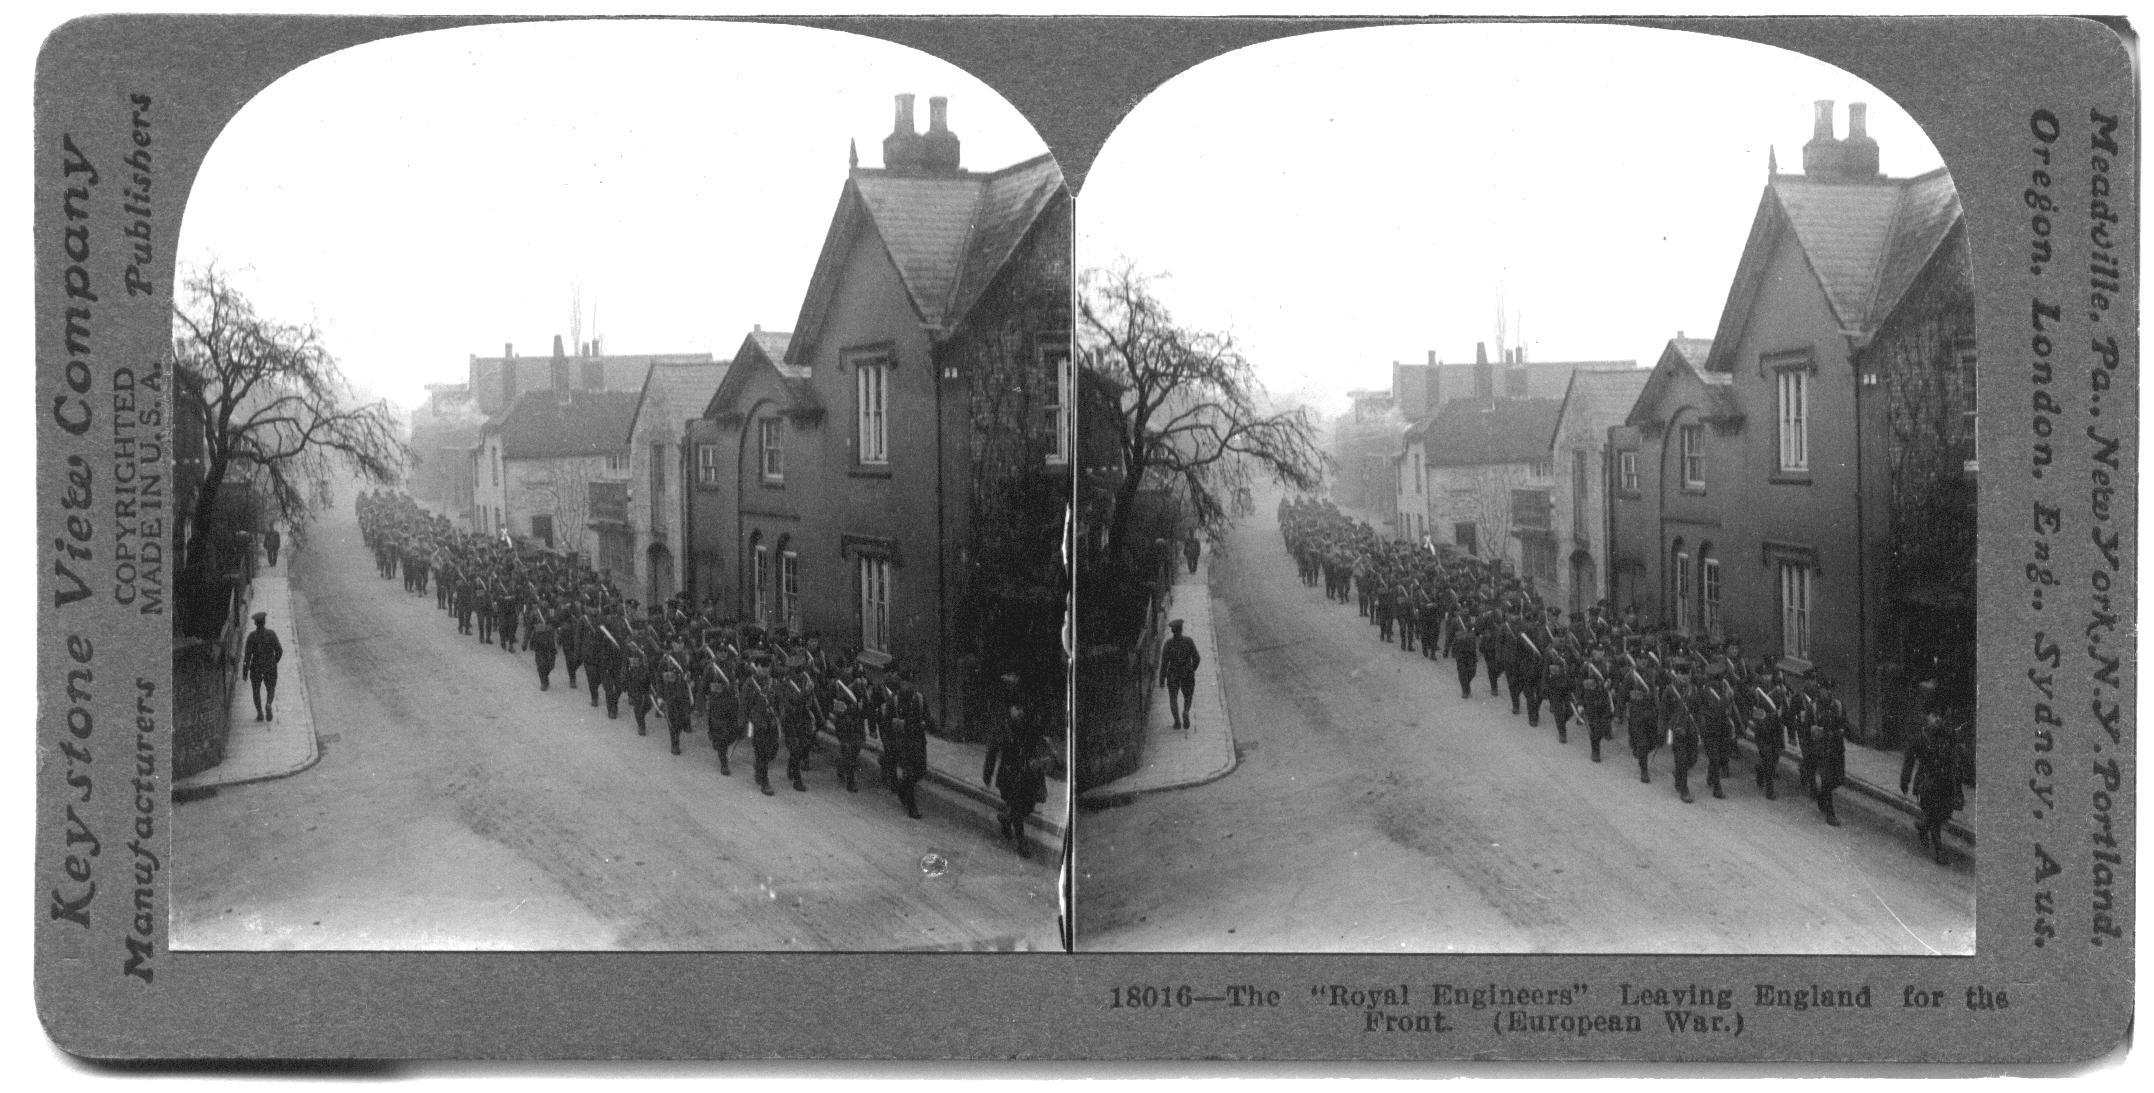 The "Royal Engineers" Leaving England for the Front